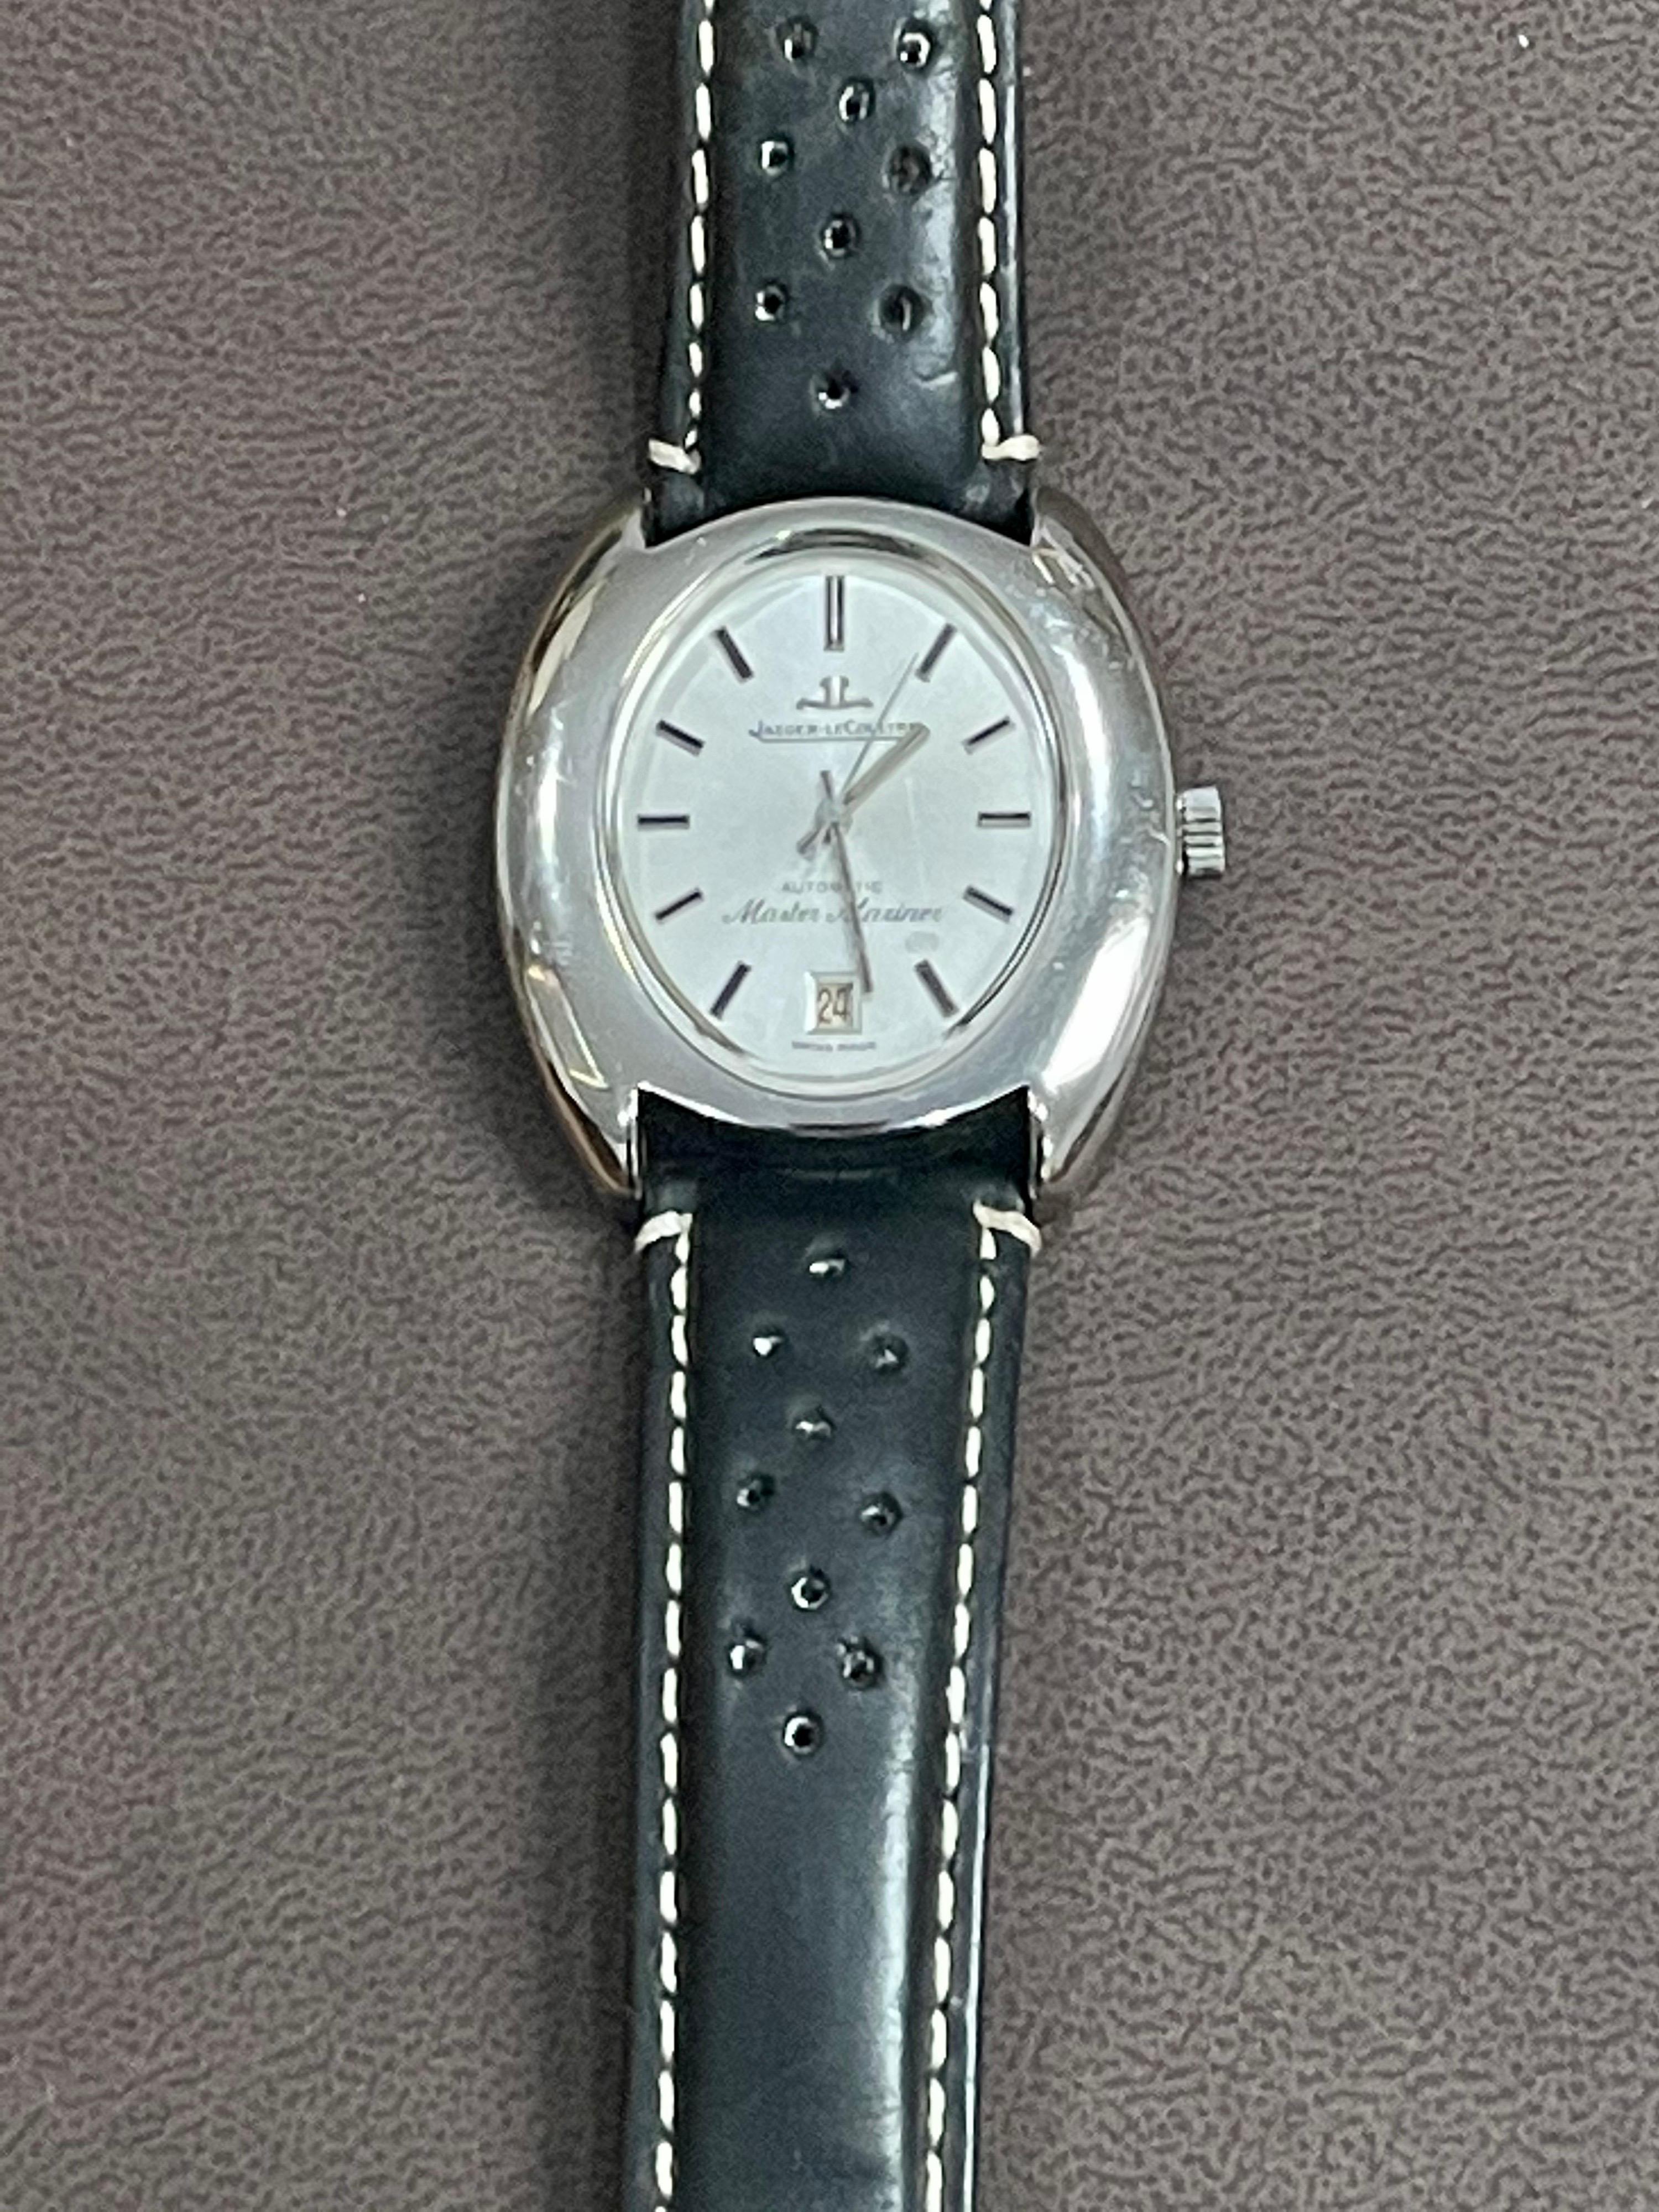 Watch is in very good condition
Total length of the watch with leather belt is 9.5 inch
Department:	Men	                                                                           Reference Number:	Does Not Apply
Watch Shape:	Oval	                   